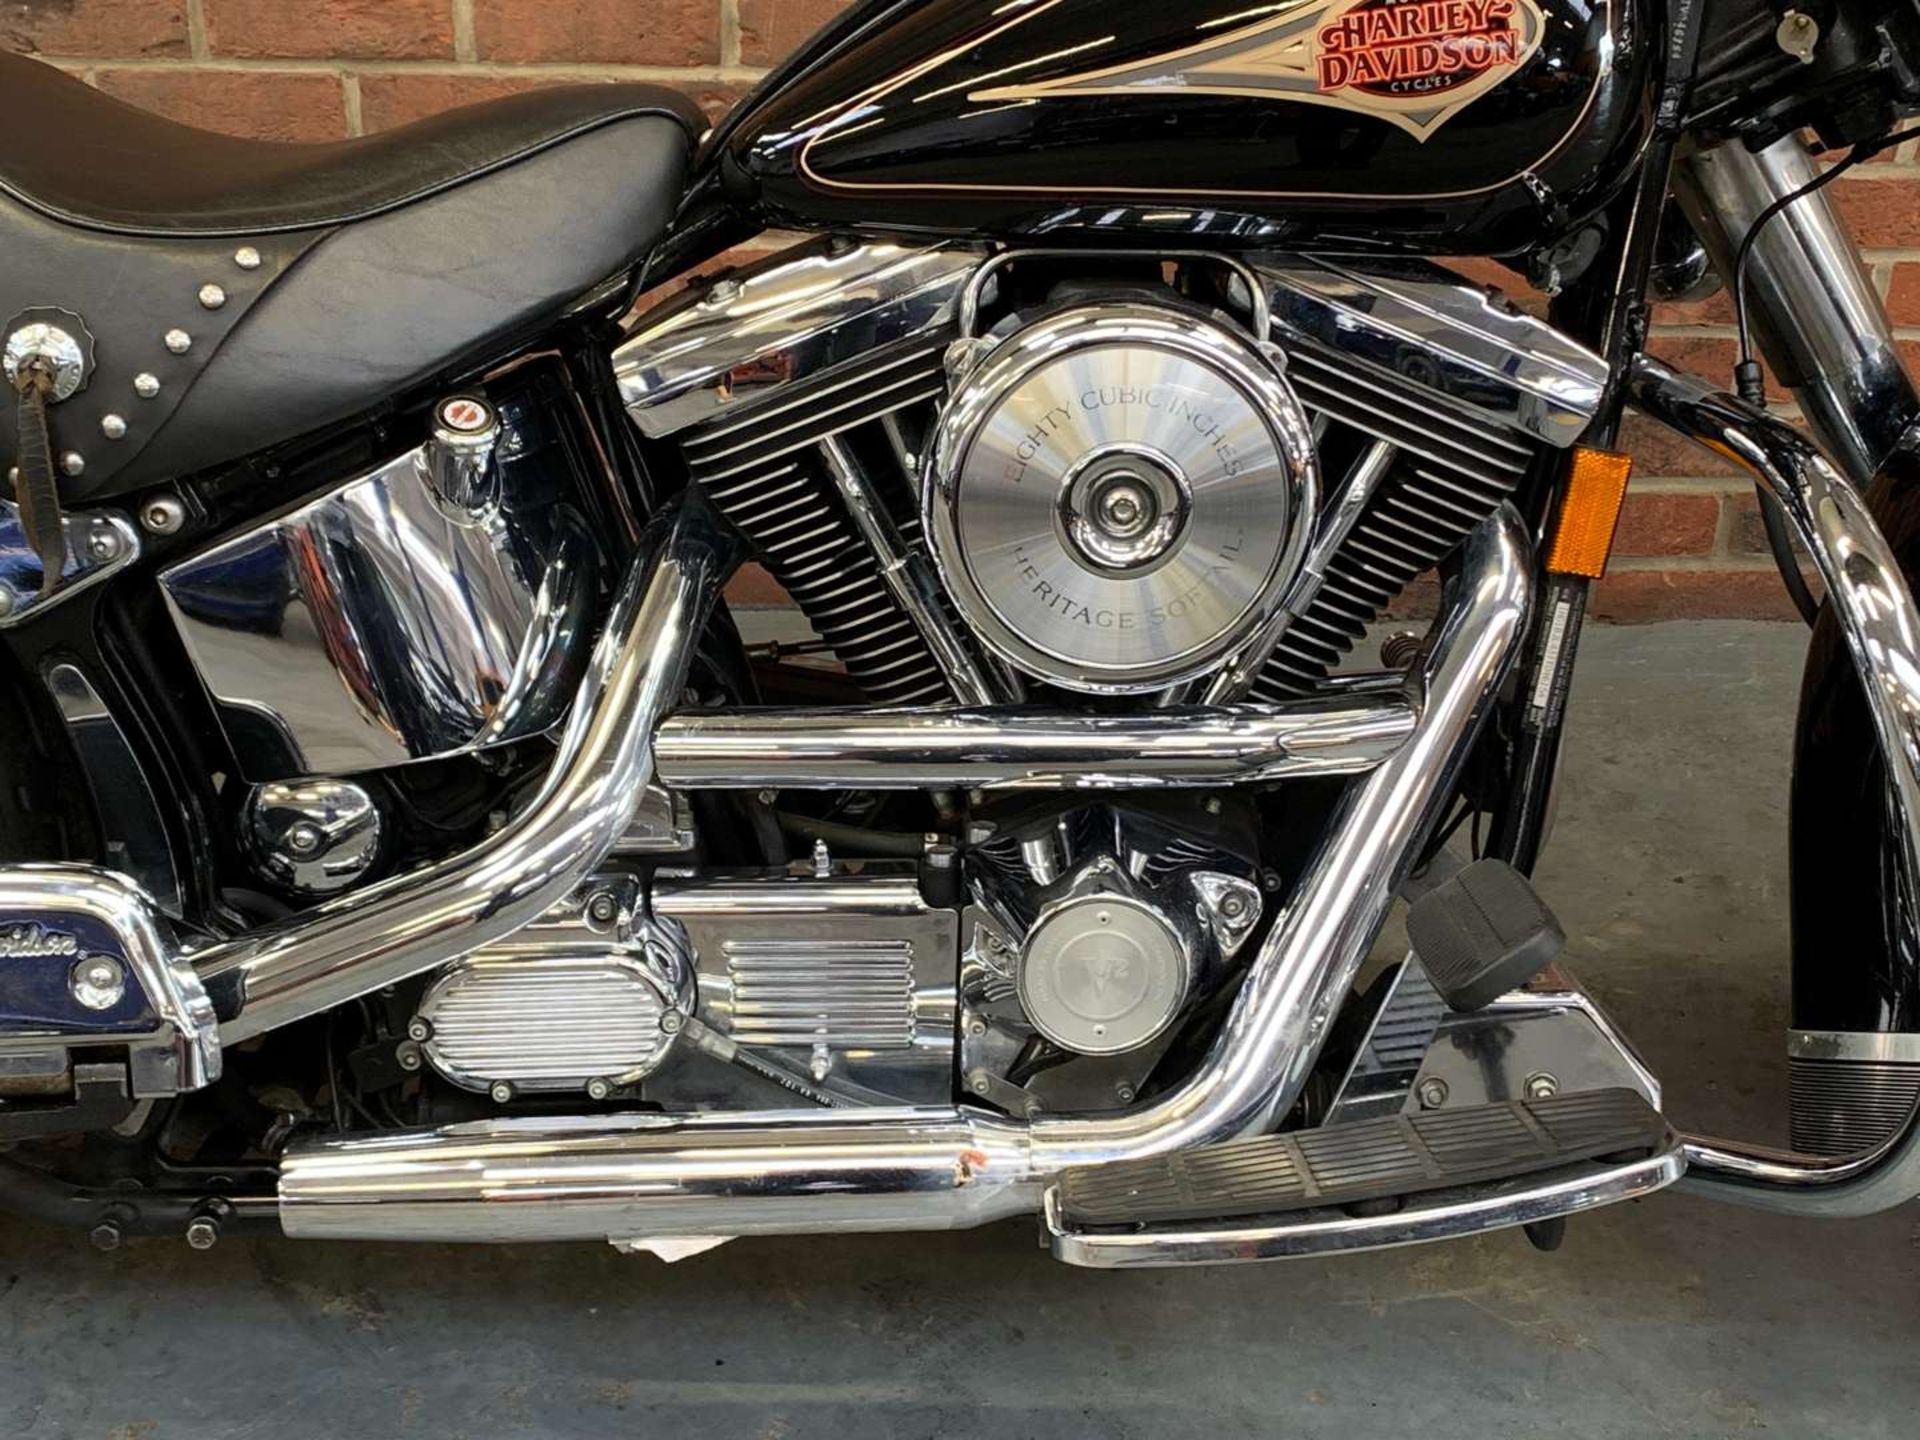 1996 HARLEY DAVIDSON FLSTC ONE OWNER FROM NEW - Image 5 of 22